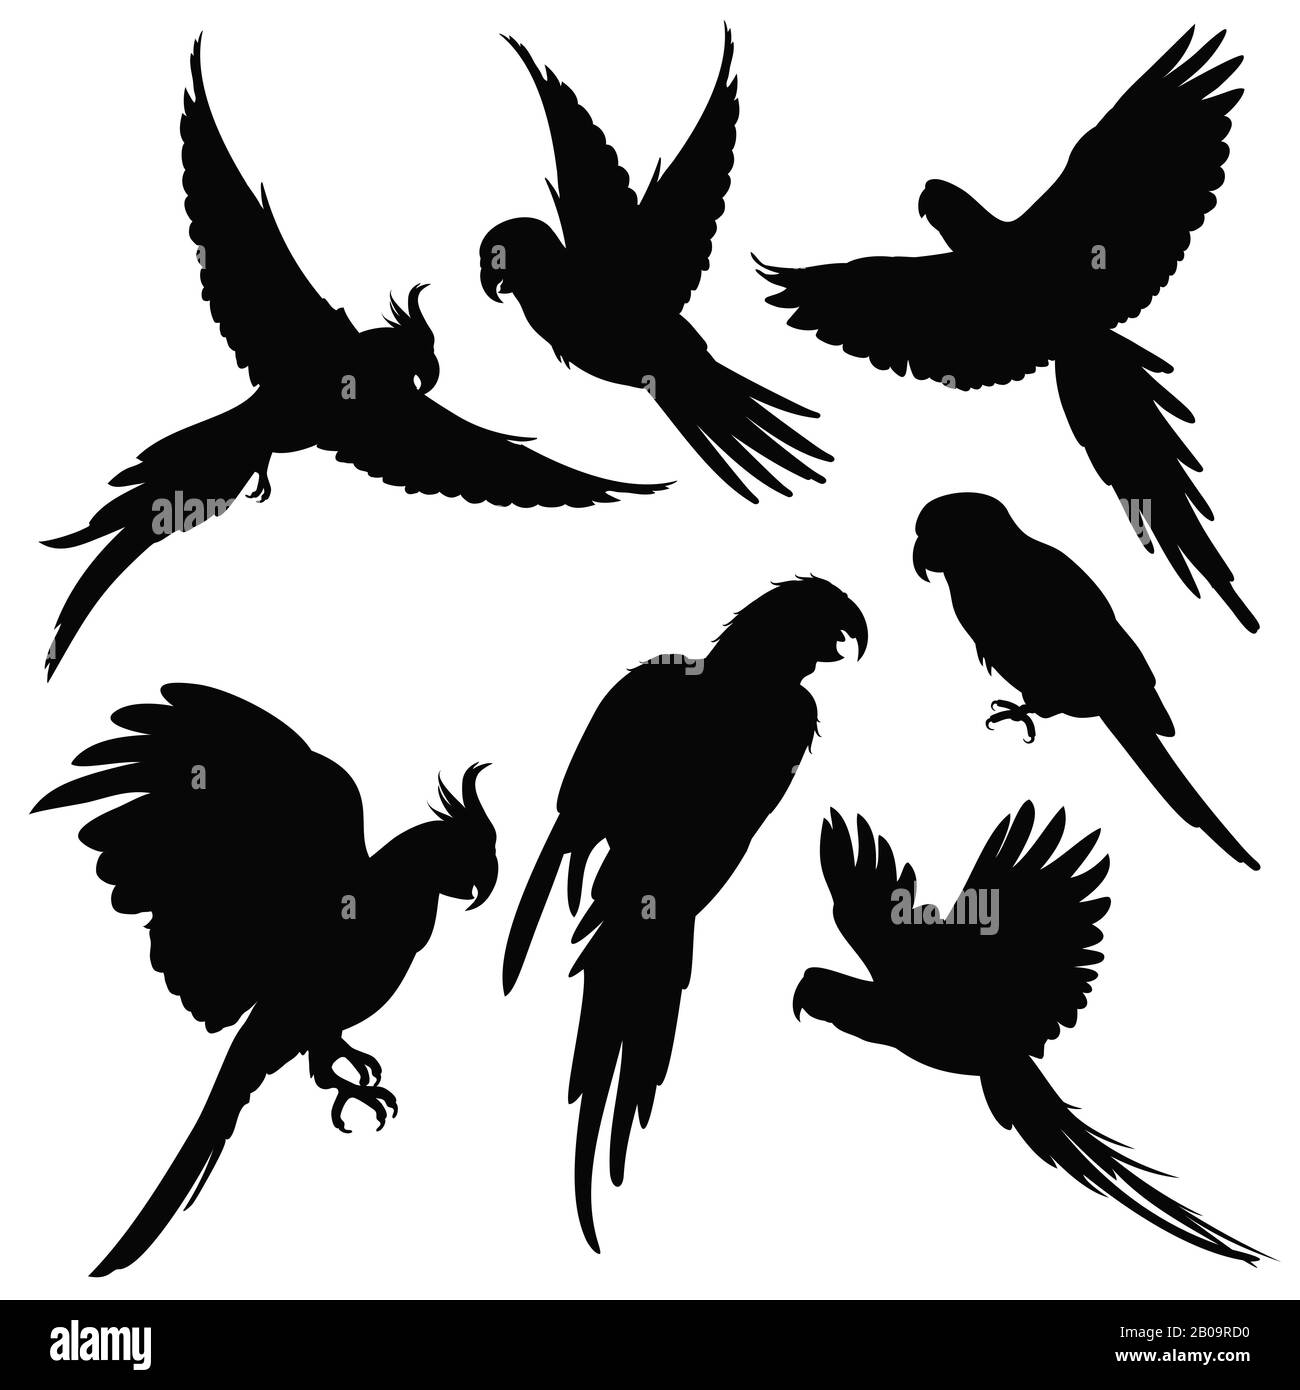 Vector parrots, amazon jungle birds silhouettes isolated on white. Black silhouette parrots, illustration of exotic bird parrot Stock Vector